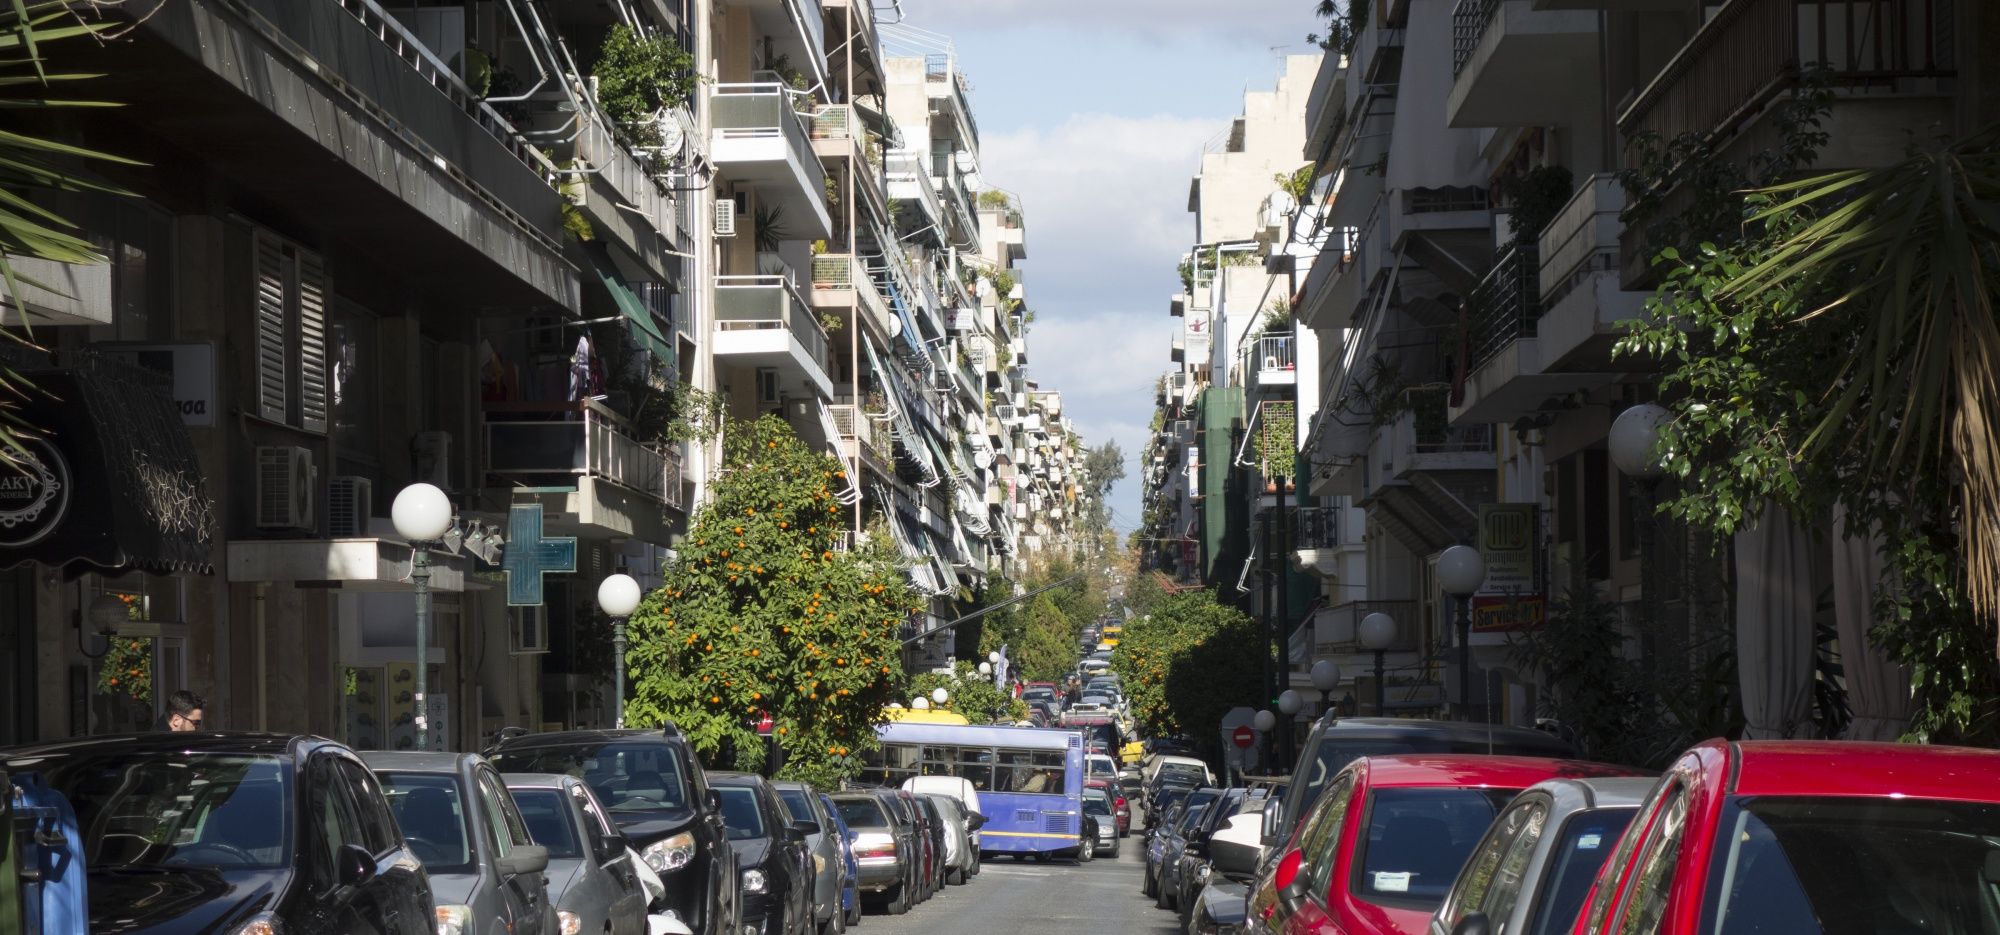 A row of typical Athenian modernist apartments